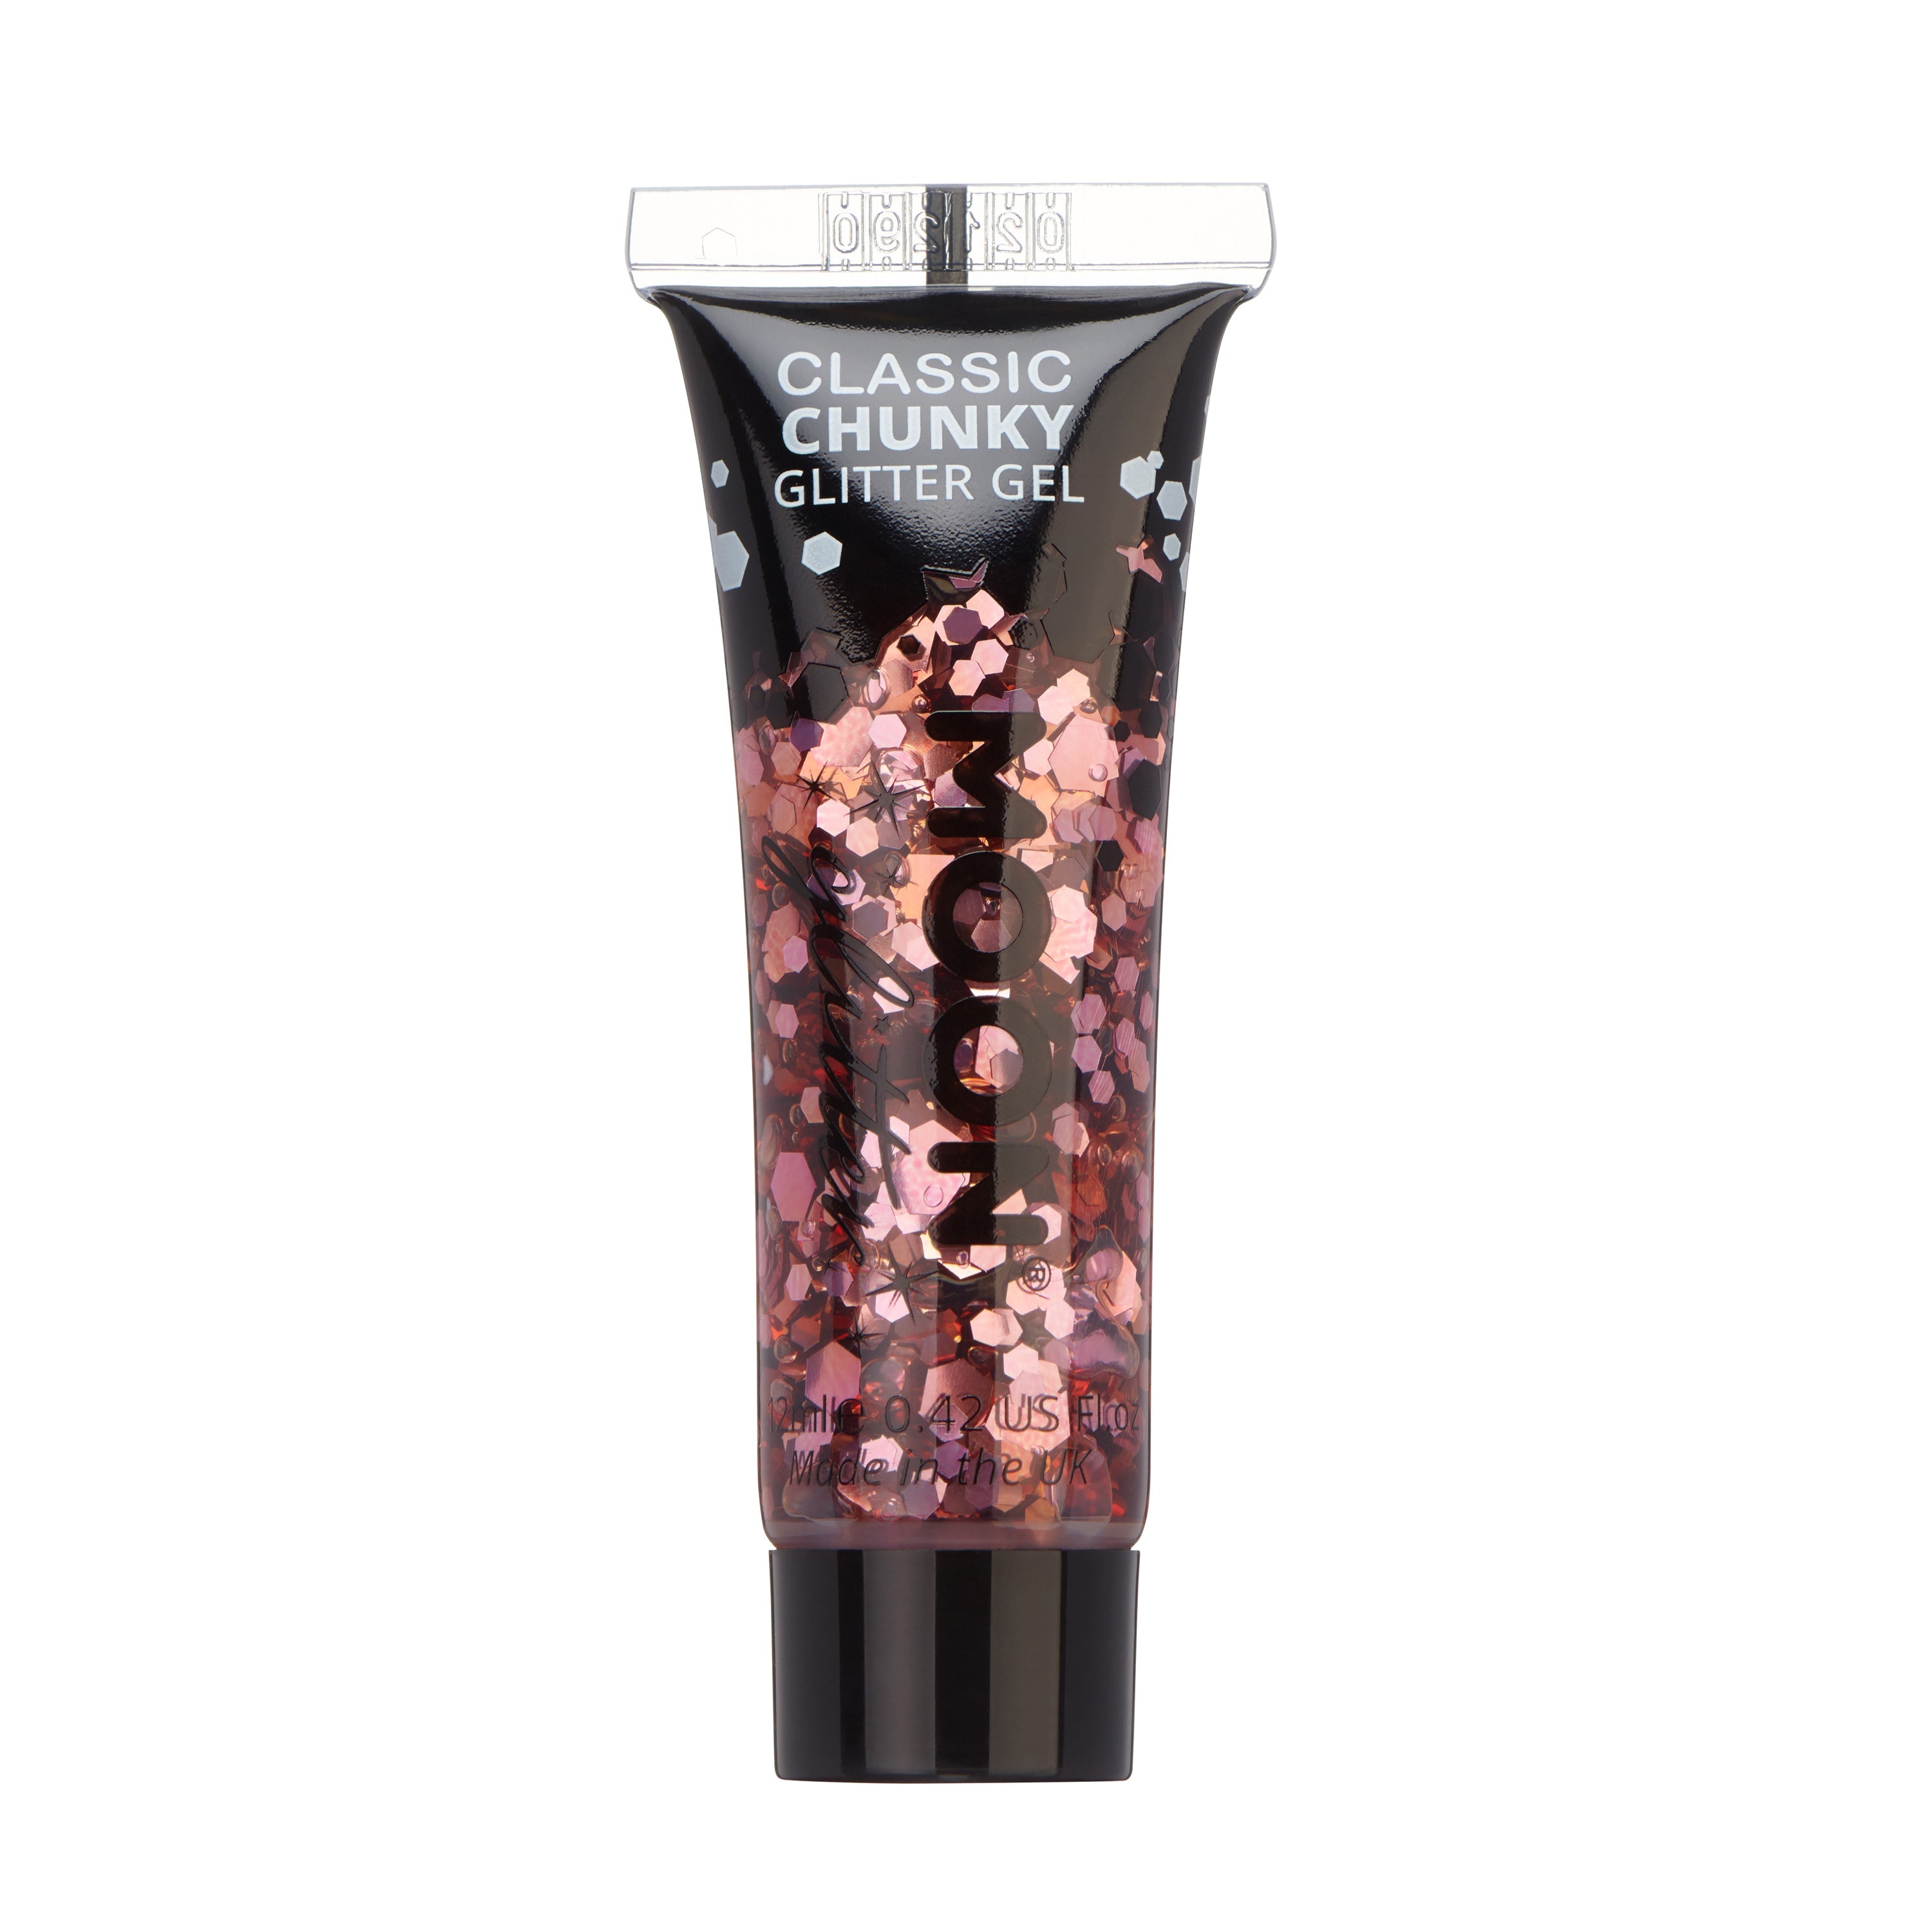 Pink - Classic Chunky Face & Body Glitter Gel, 12mL. Cosmetically certified, FDA & Health Canada compliant, cruelty free and vegan.